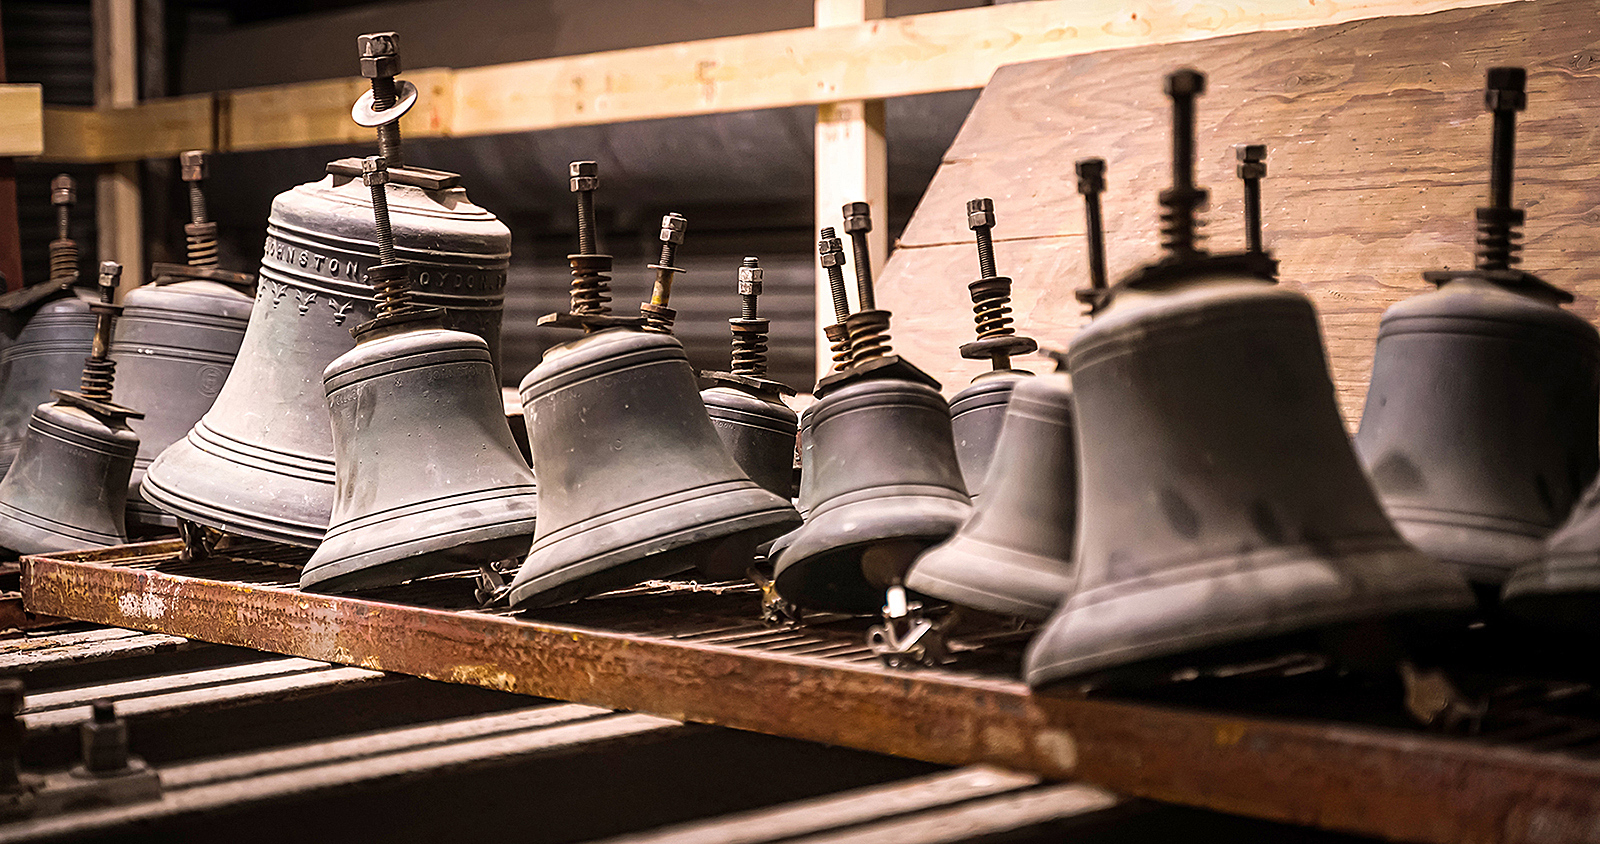 Dutch know-how helps put the chime back in Parliament's bells